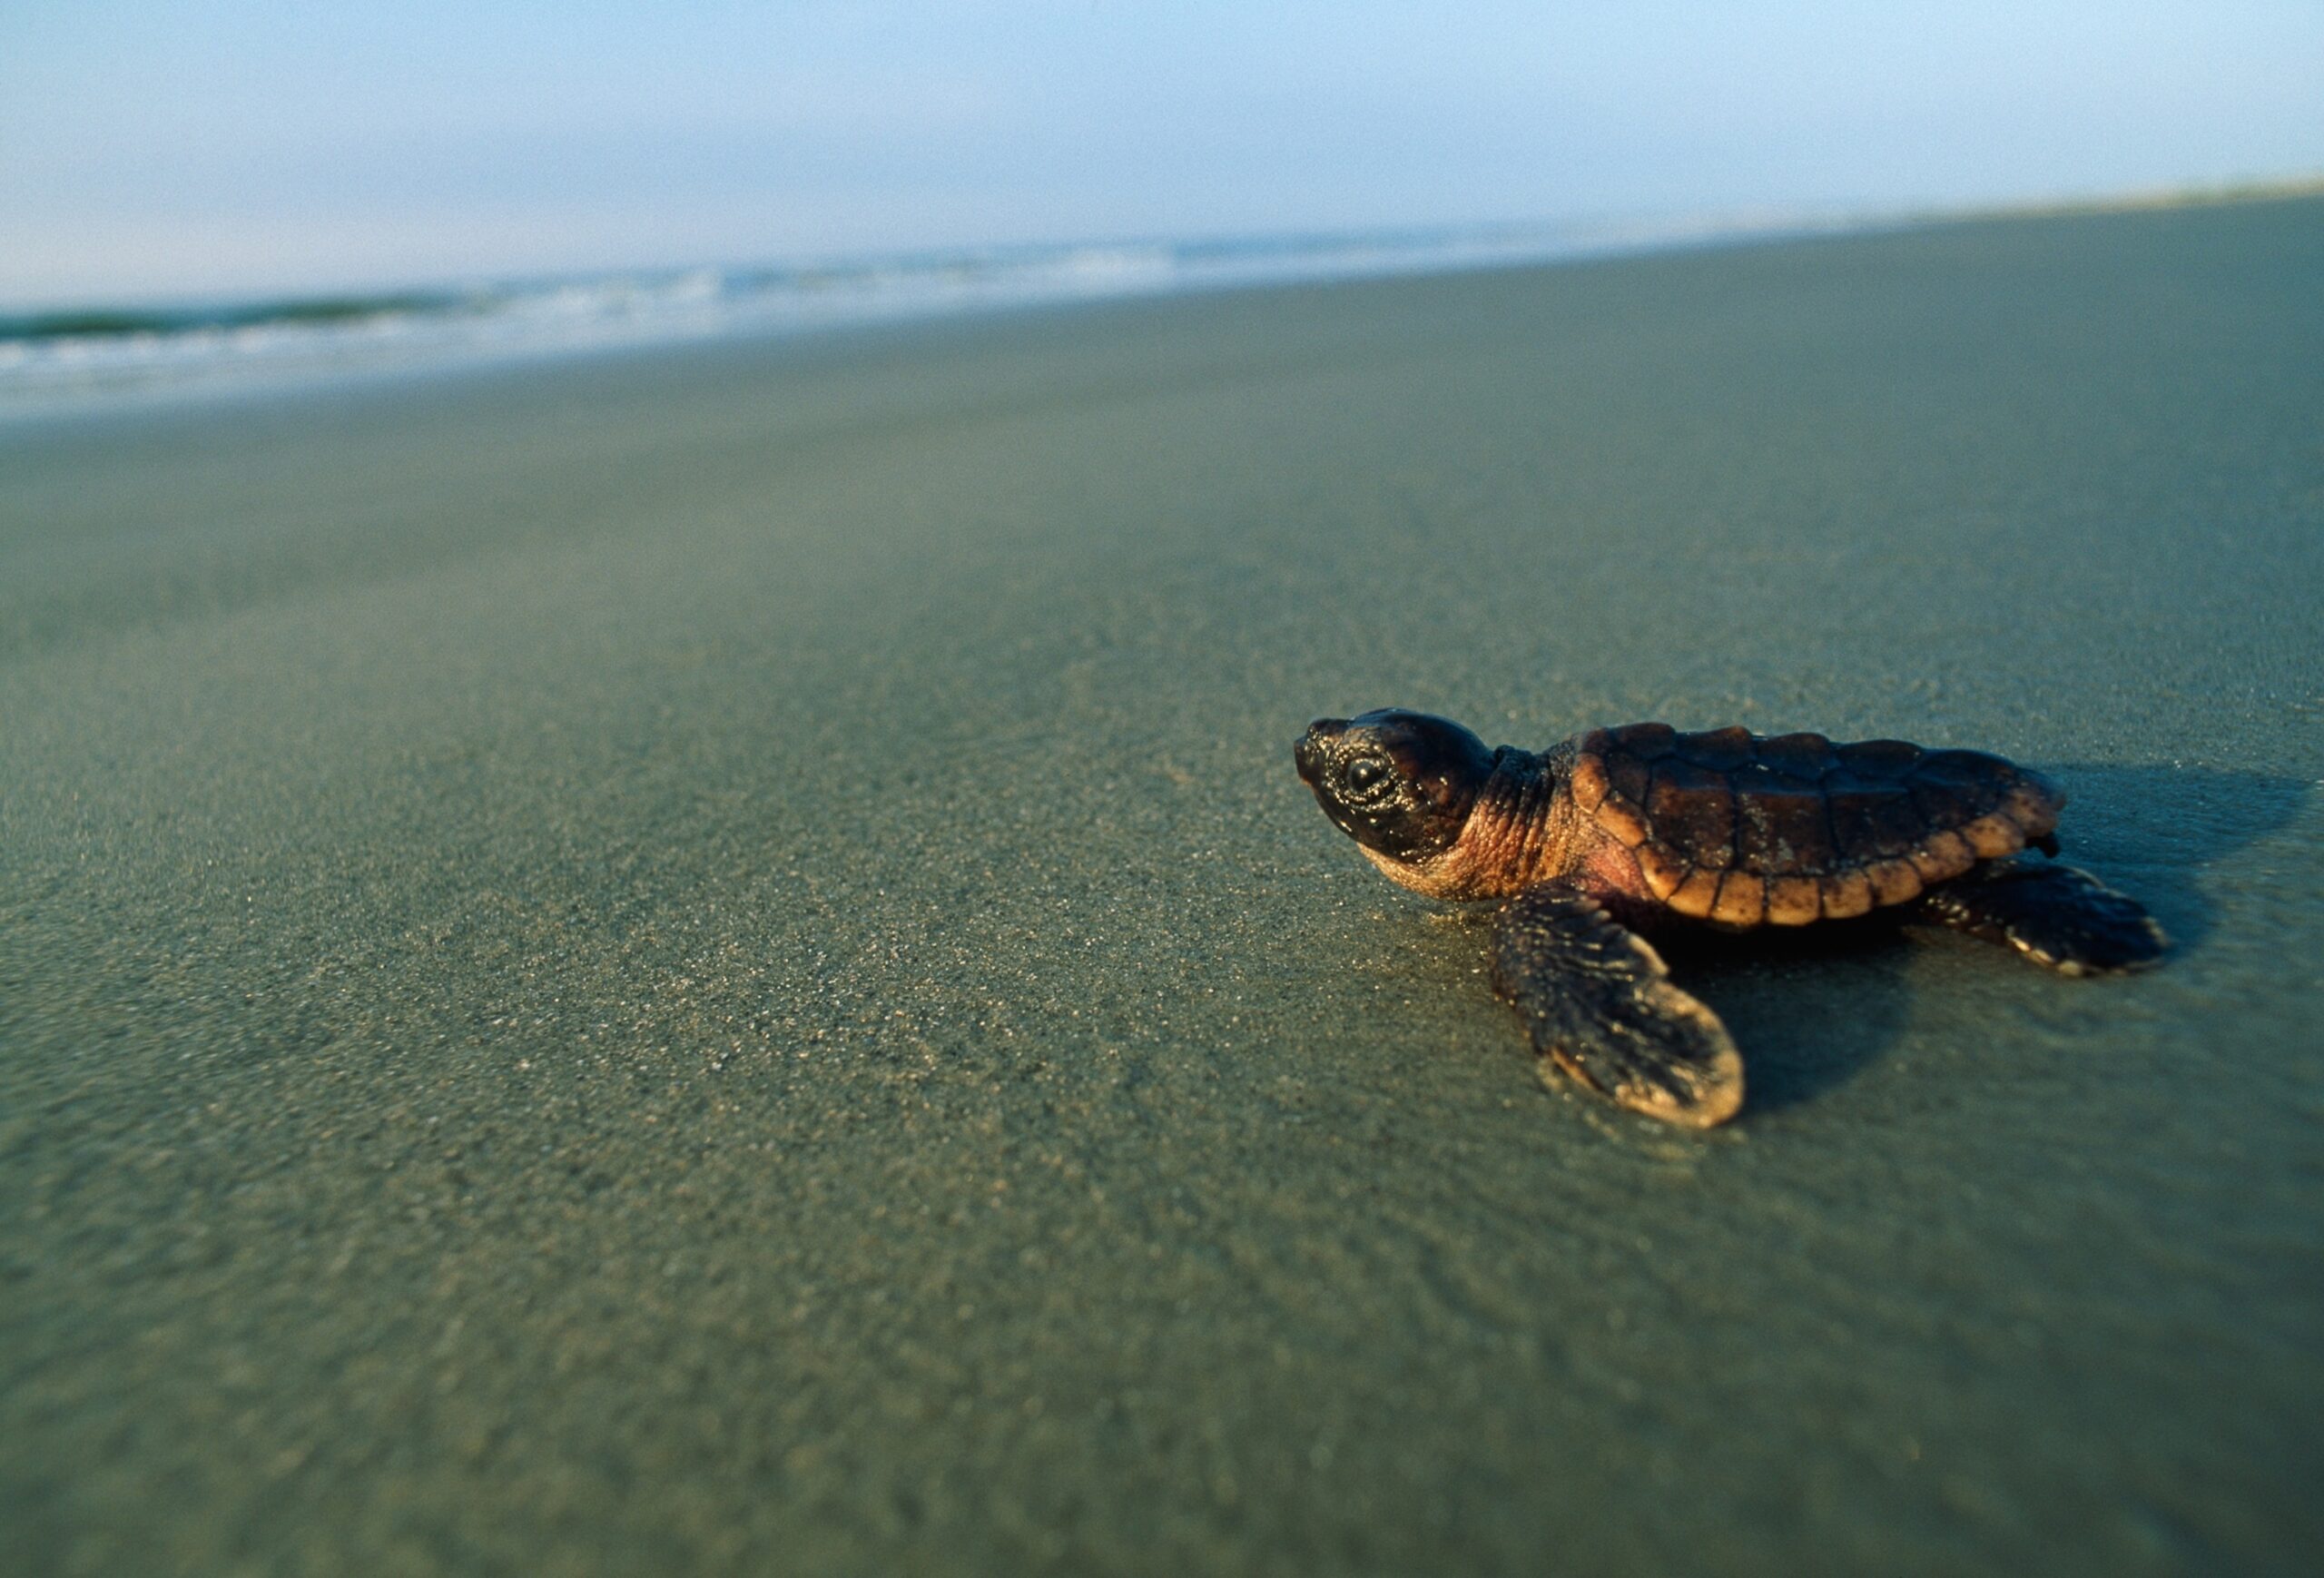 How Do Sea Turtles Know to Go to the Ocean?